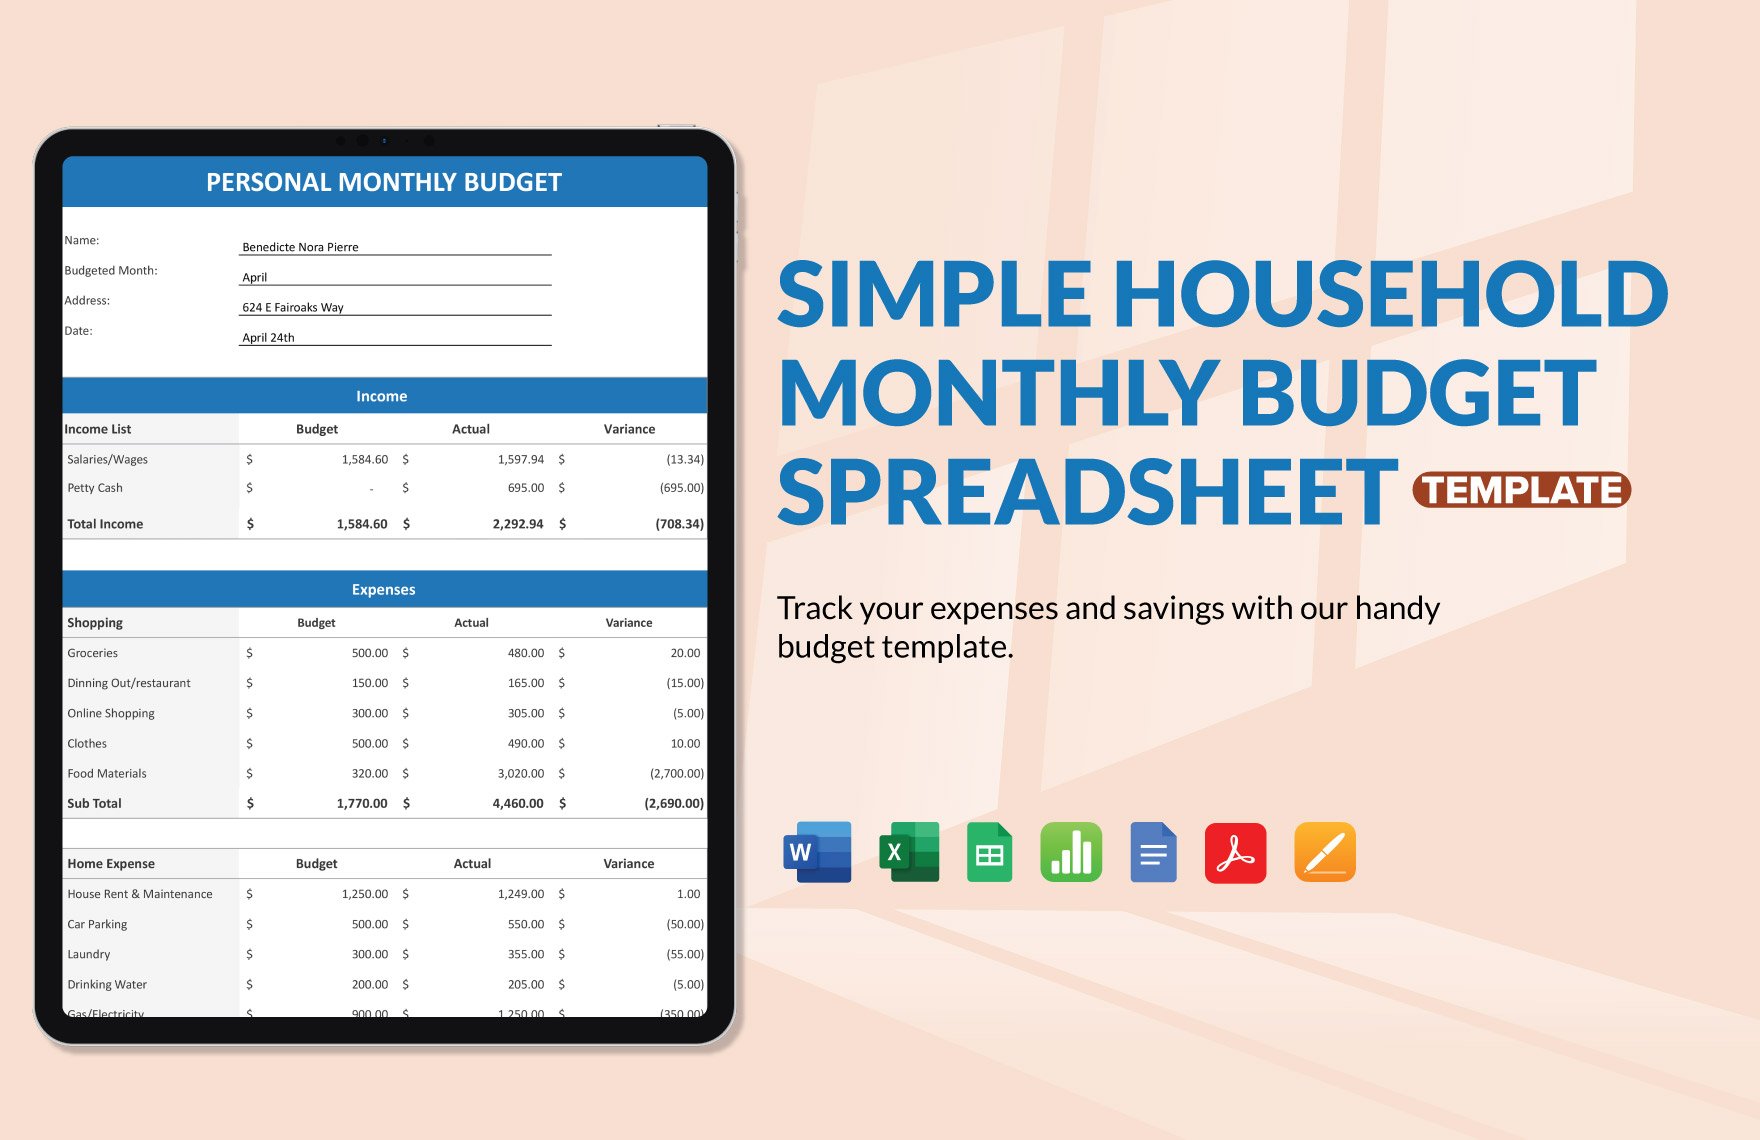 Free Simple Household Monthly Budget Spreadsheet Template in Word, Google Docs, Excel, PDF, Google Sheets, Apple Pages, Apple Numbers